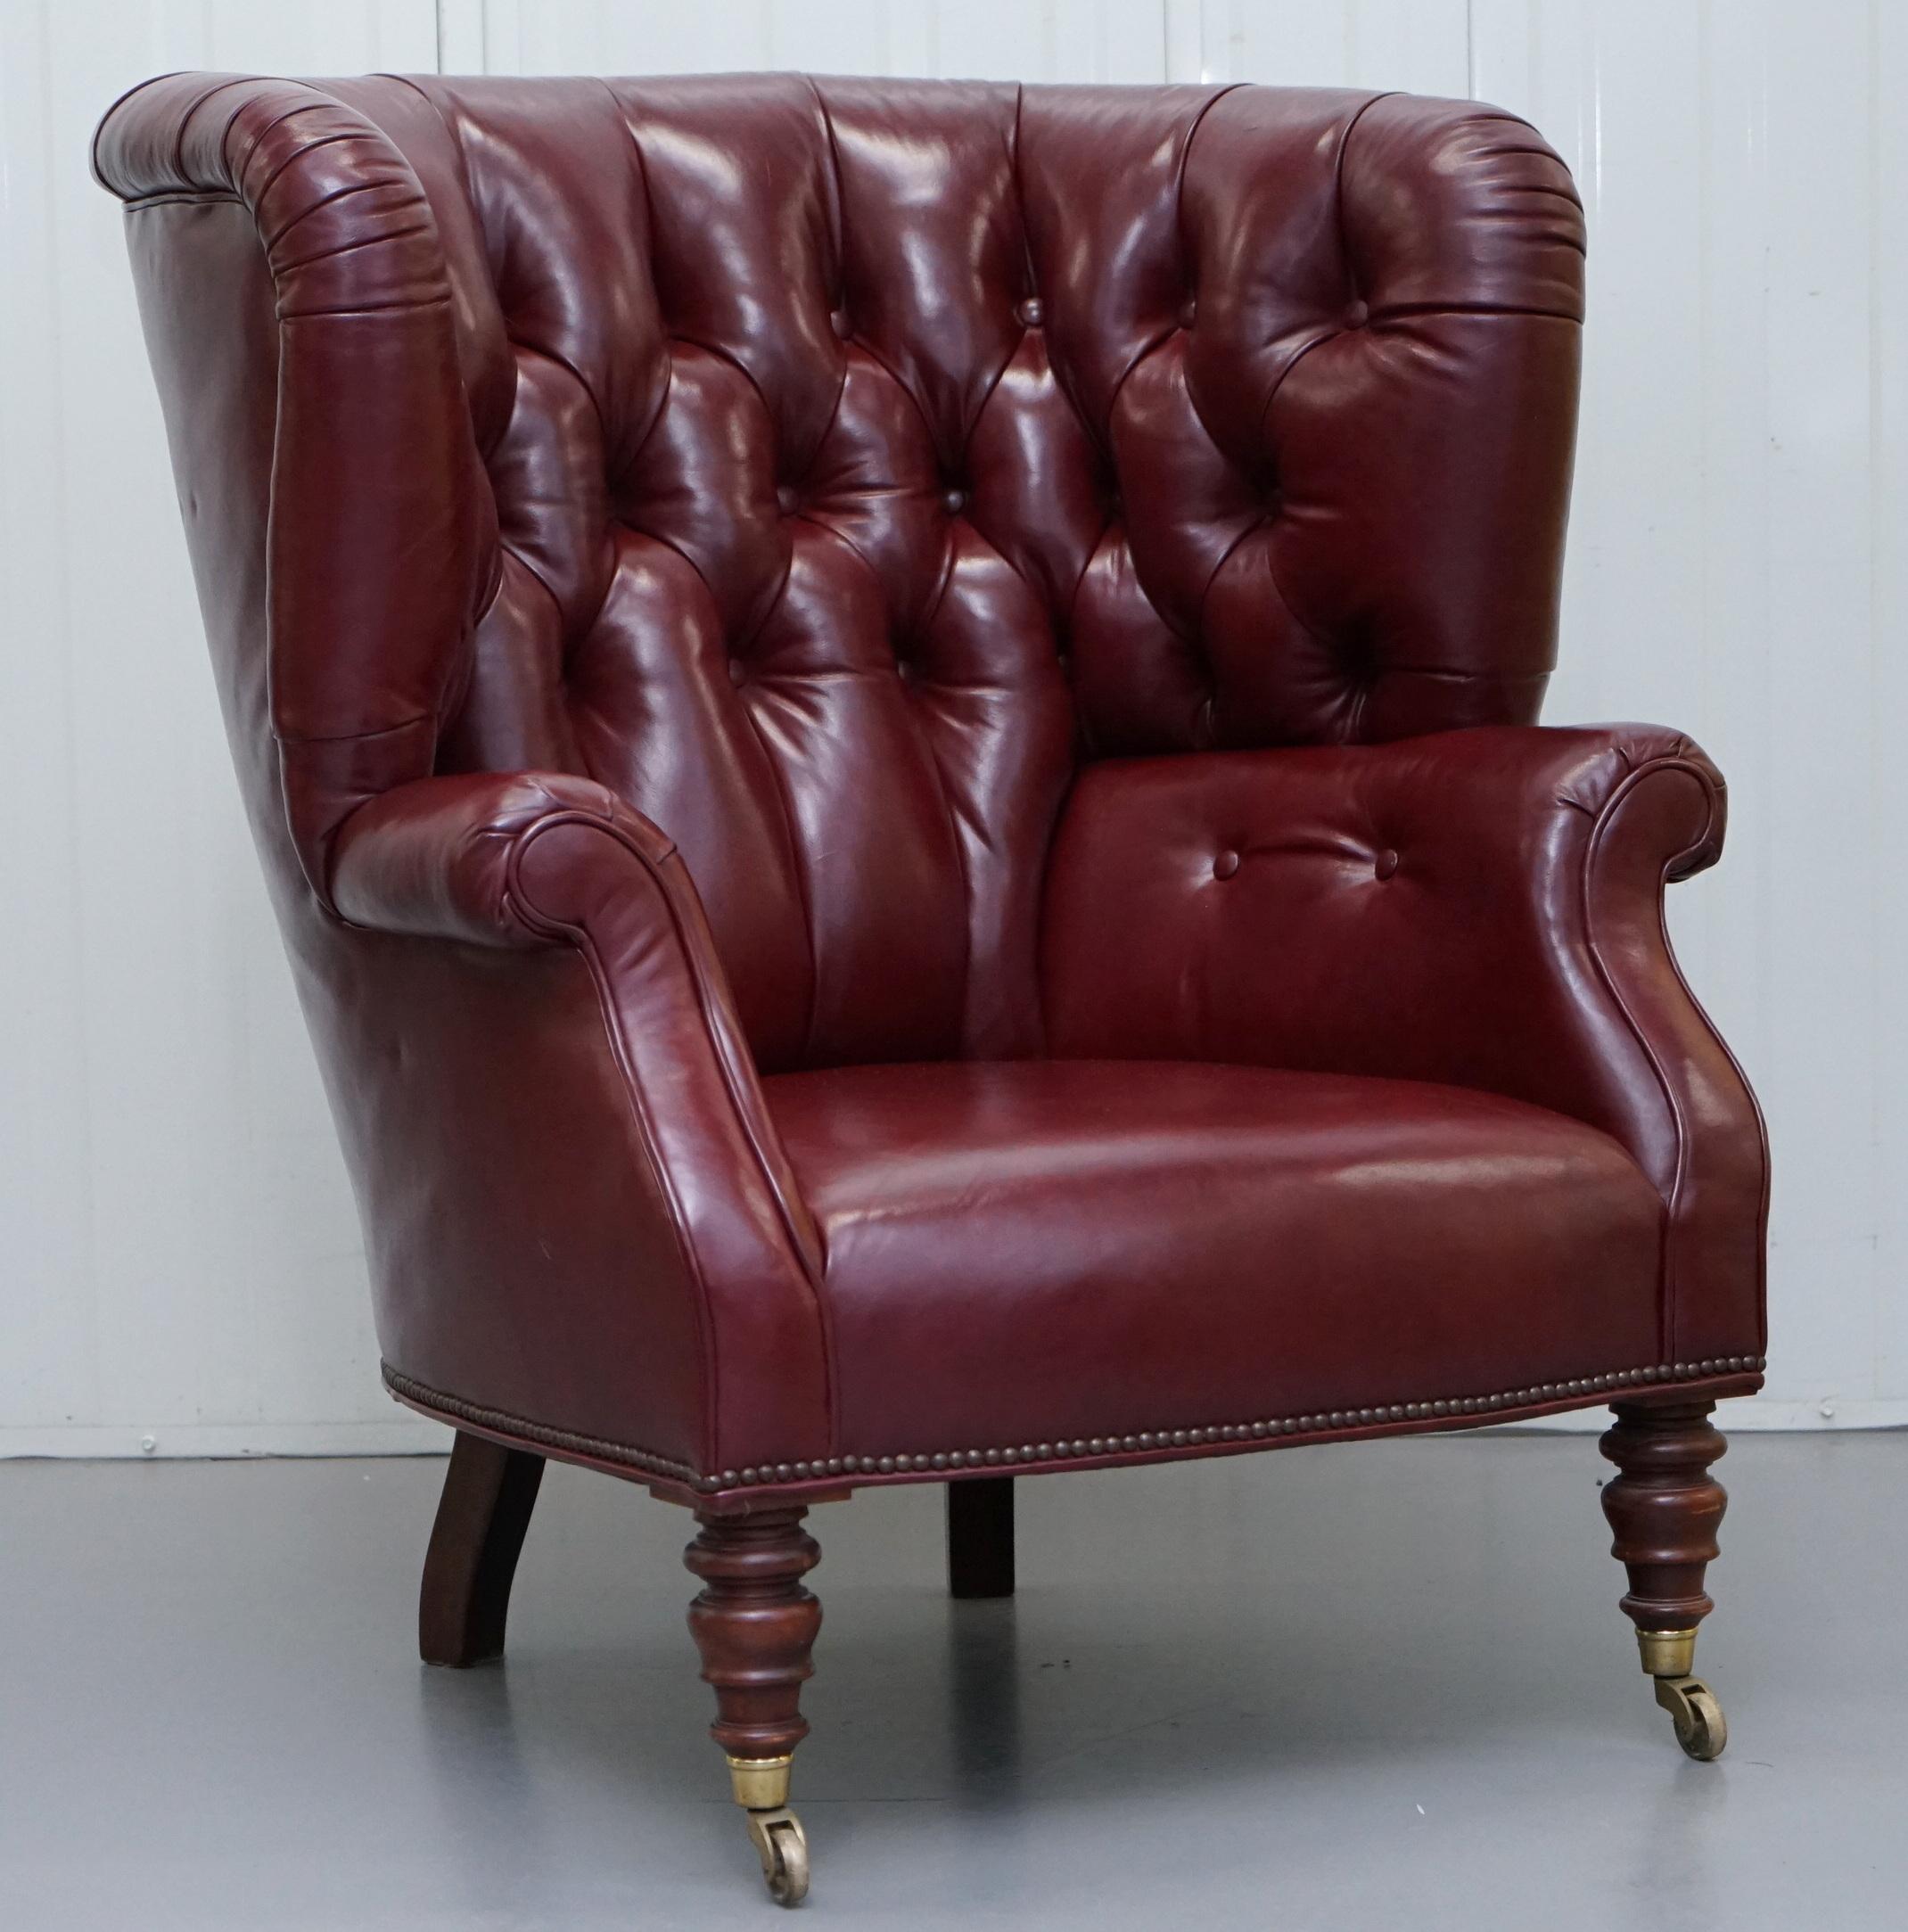 We are delighted to this stunning original Baker Furniture Oxblood leather porters barrel back armchair

A very good looking decorative and comfortable armchair, the leather is soft and subtle, the timber hand stained and French polished

Baker